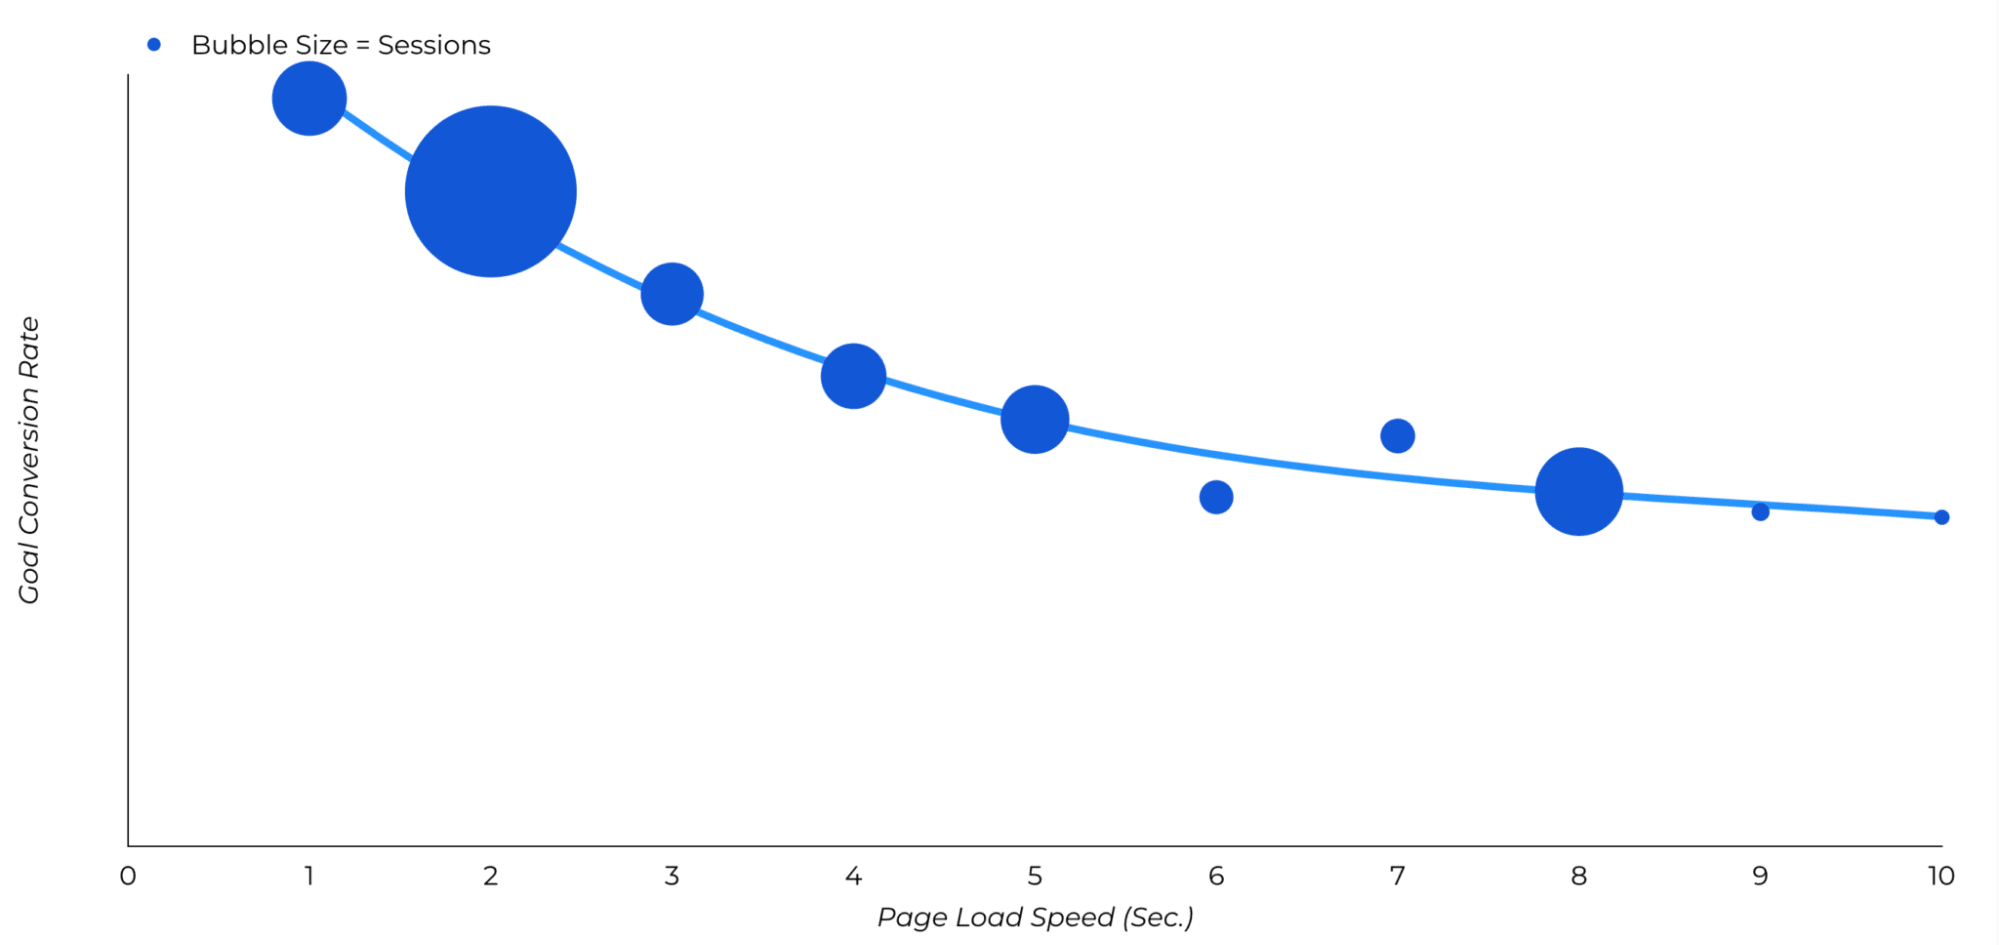 Graph depicting goal conversion rate reduces with page load speed per second.